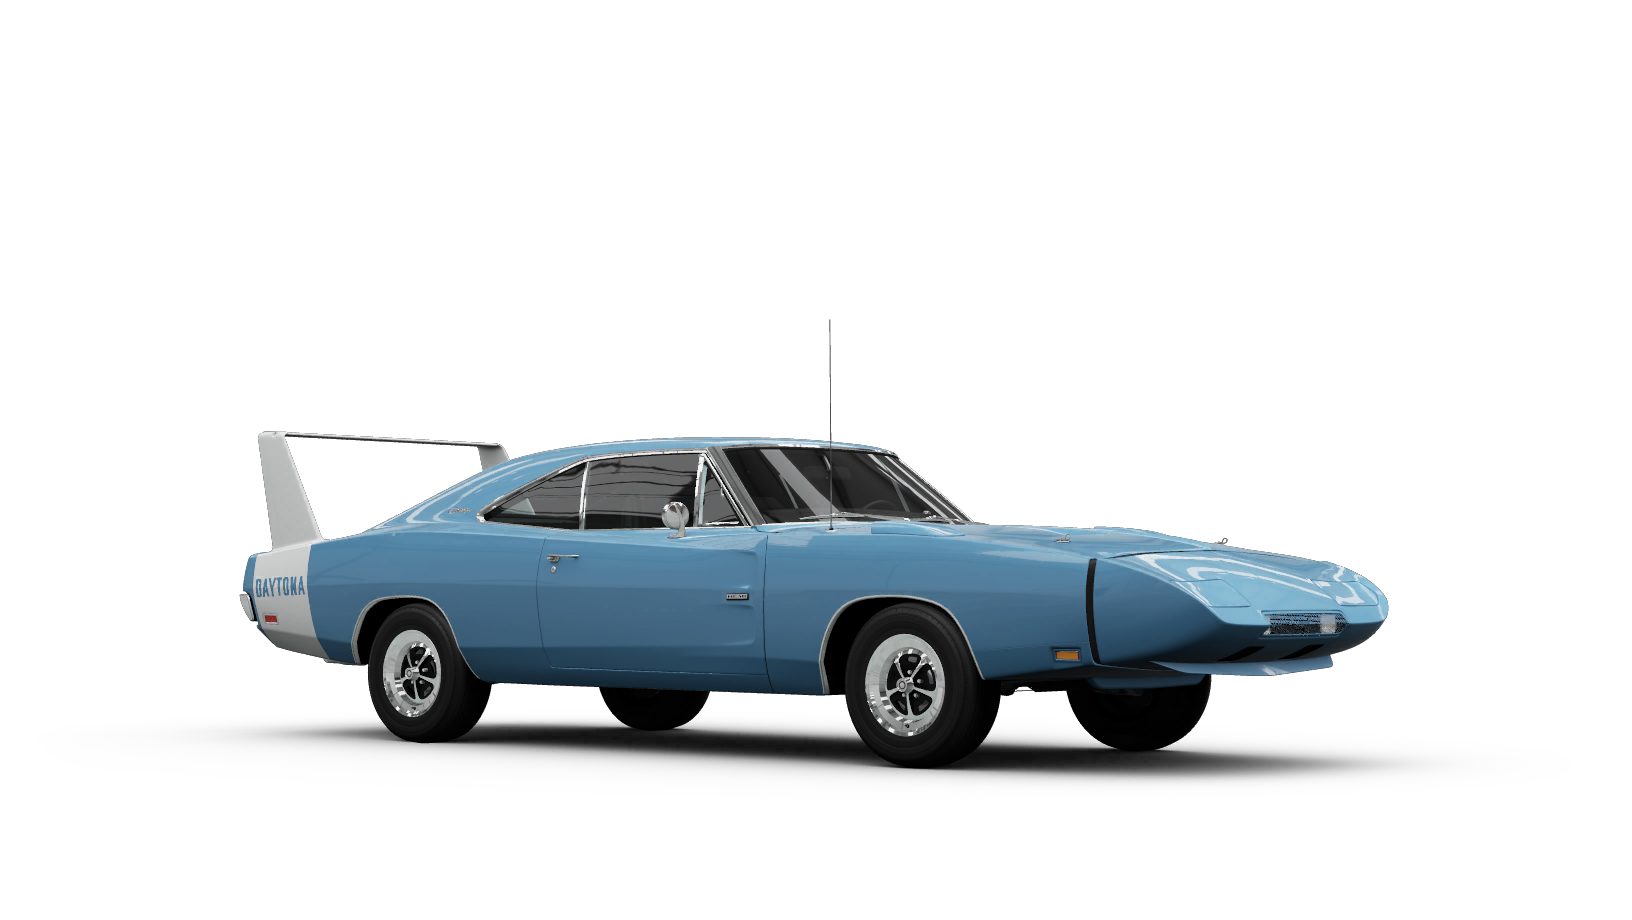 Dodge Charger 1970 PNG Images Transparent Background | PNG Play